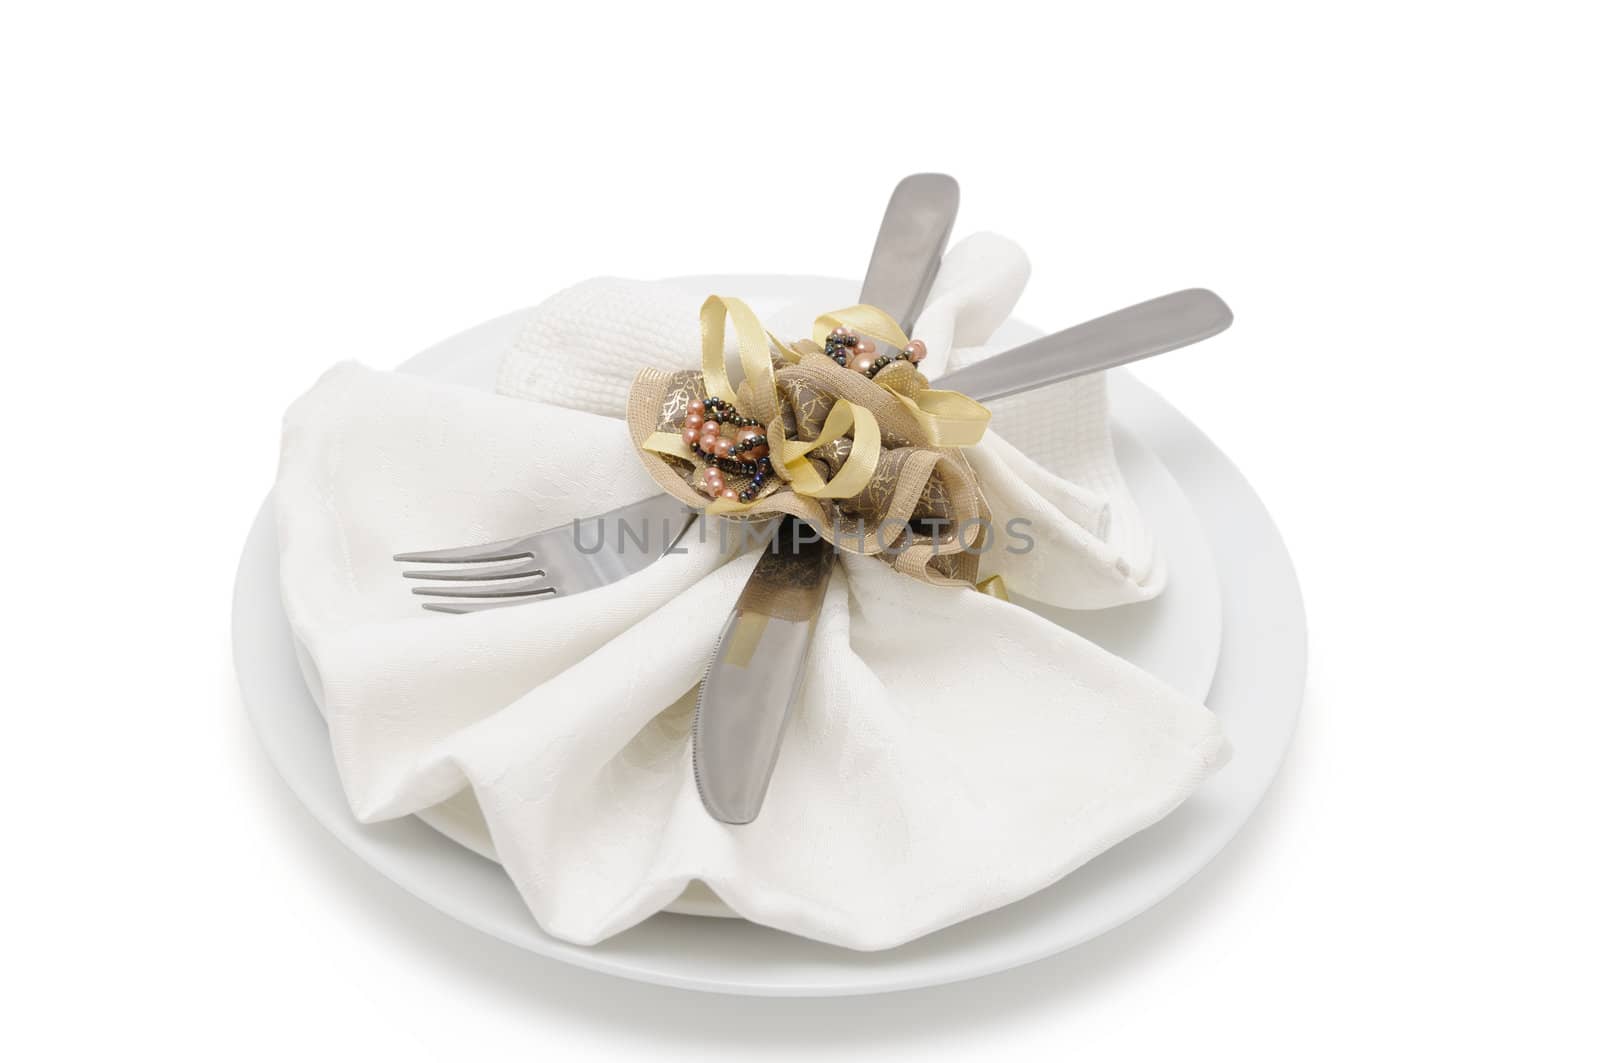 Napkin folded into a "fan " with a knife and fork on white background